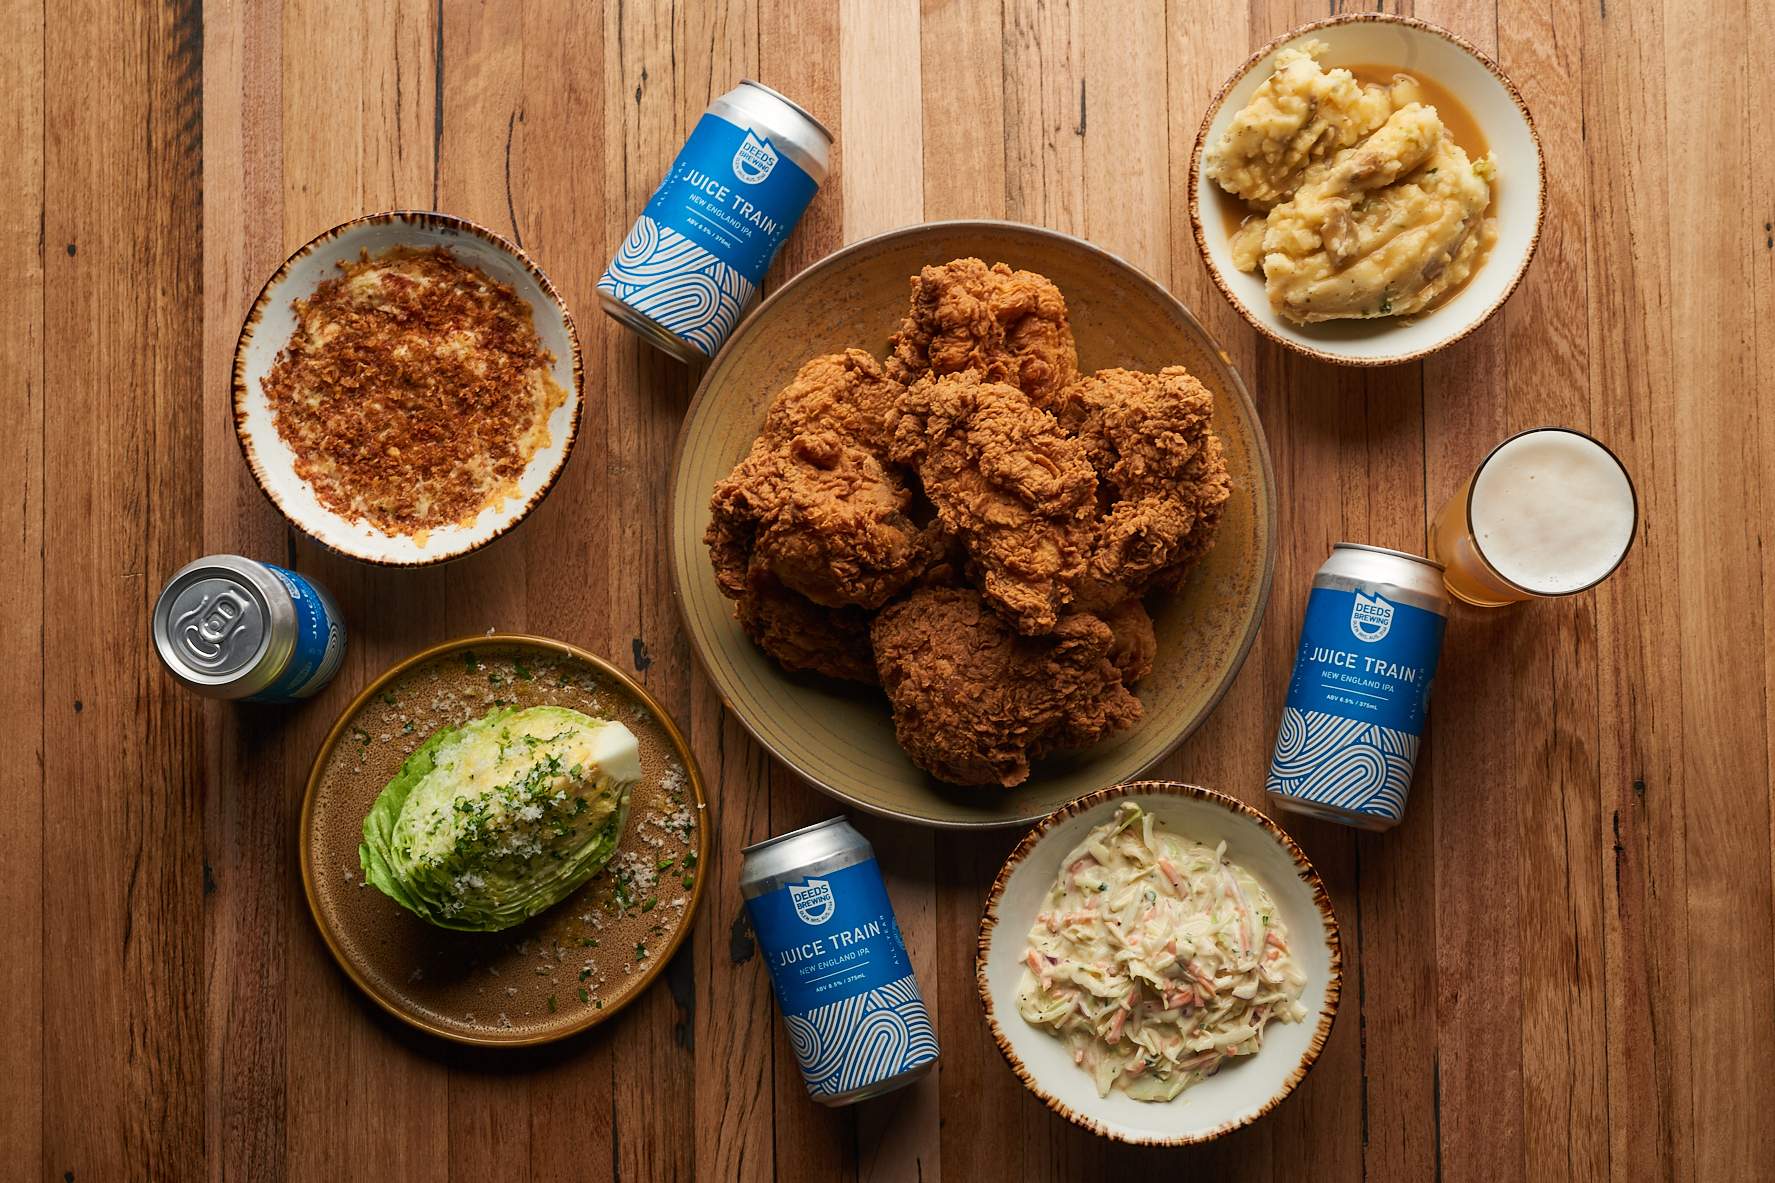 Deeds at Home Southern Fried Chicken